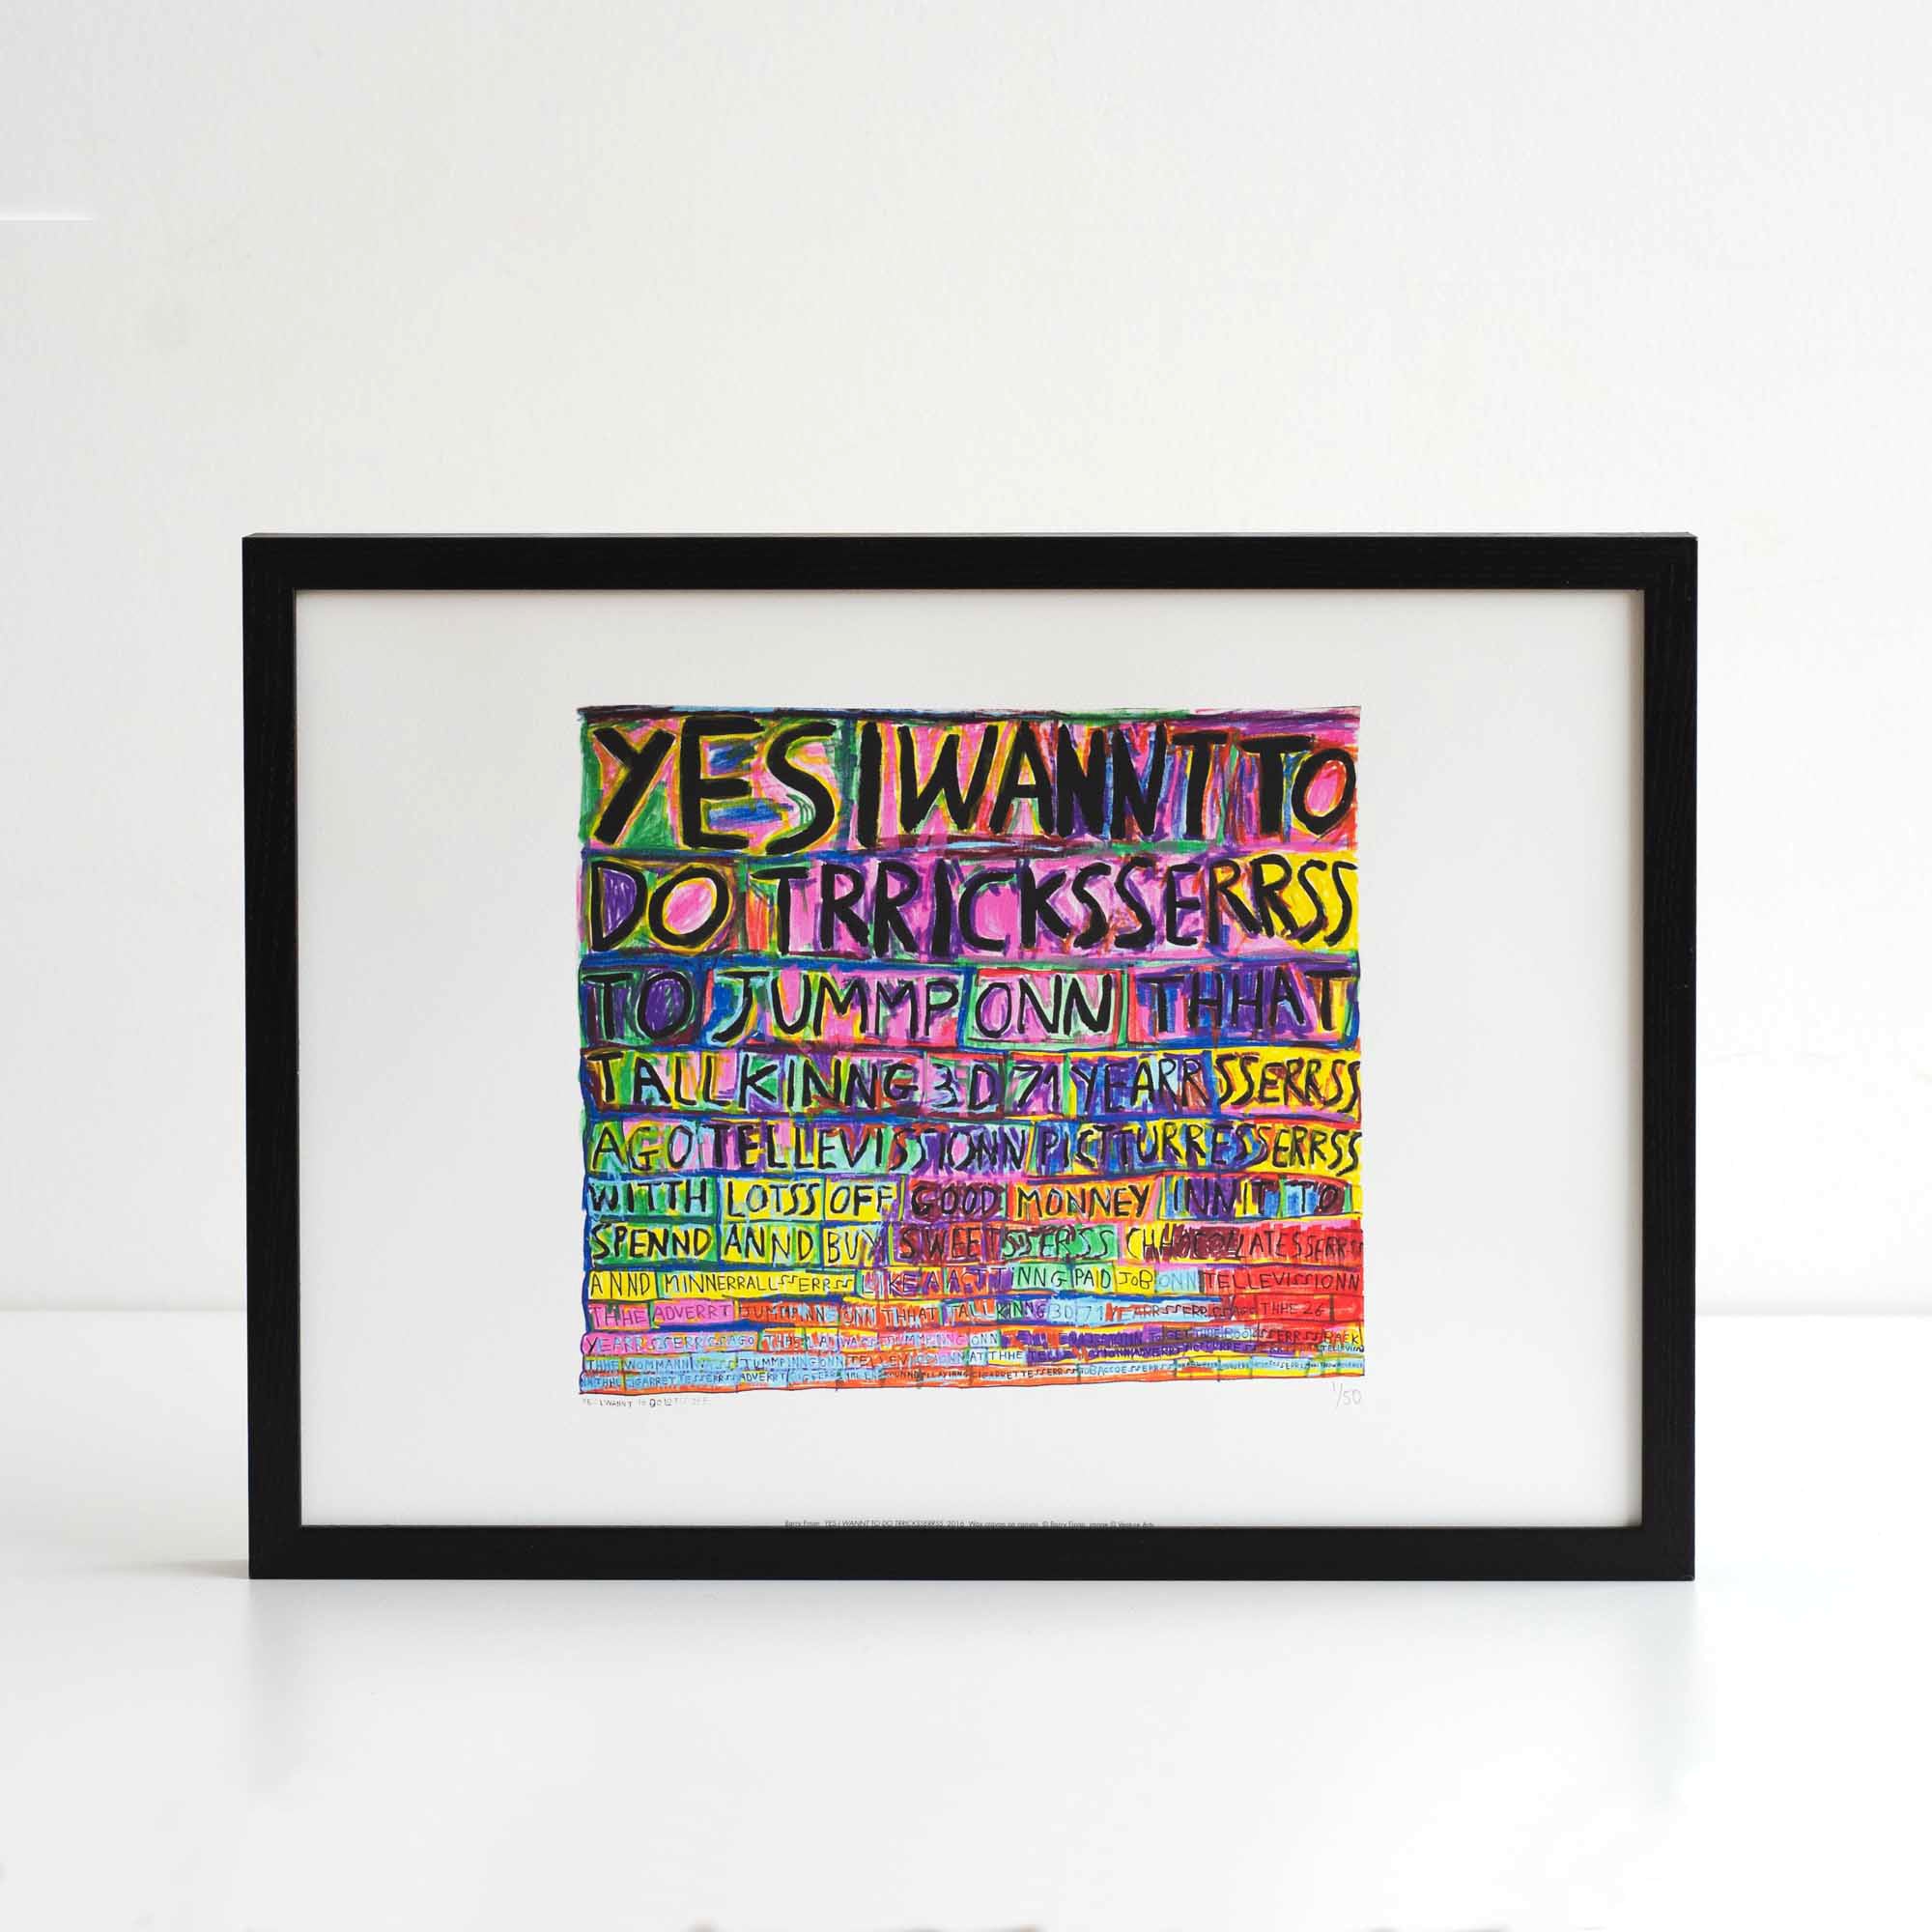 Framed Reproduction of colourful typography work by Barry Finnan